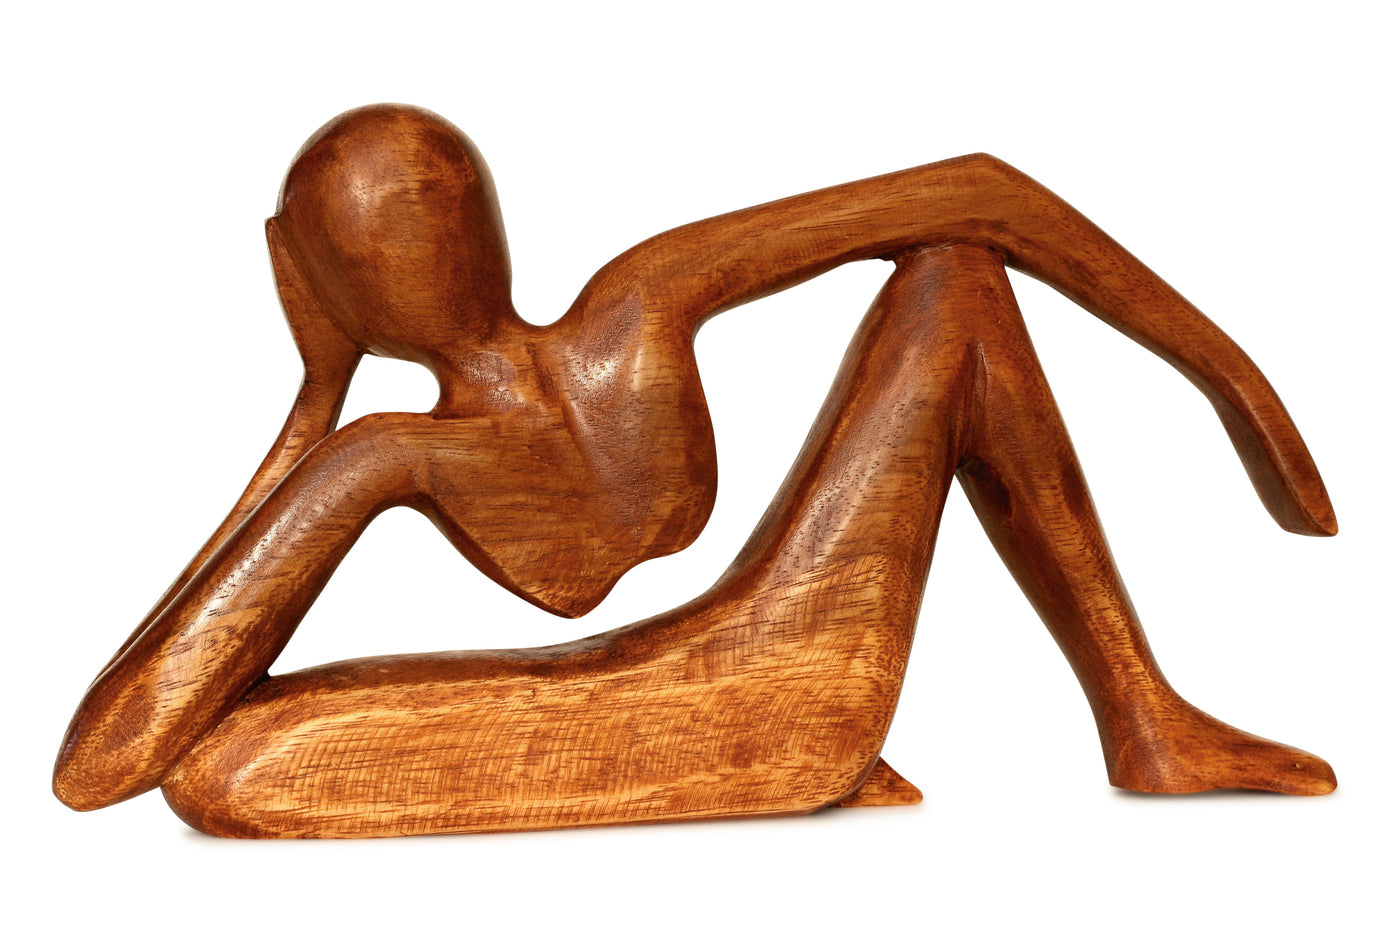 12" Wooden Handmade Abstract Sculpture Handcrafted "Relaxing Man" Home Decor Decorative Figurine Accent Decoration Hand Carved Statue